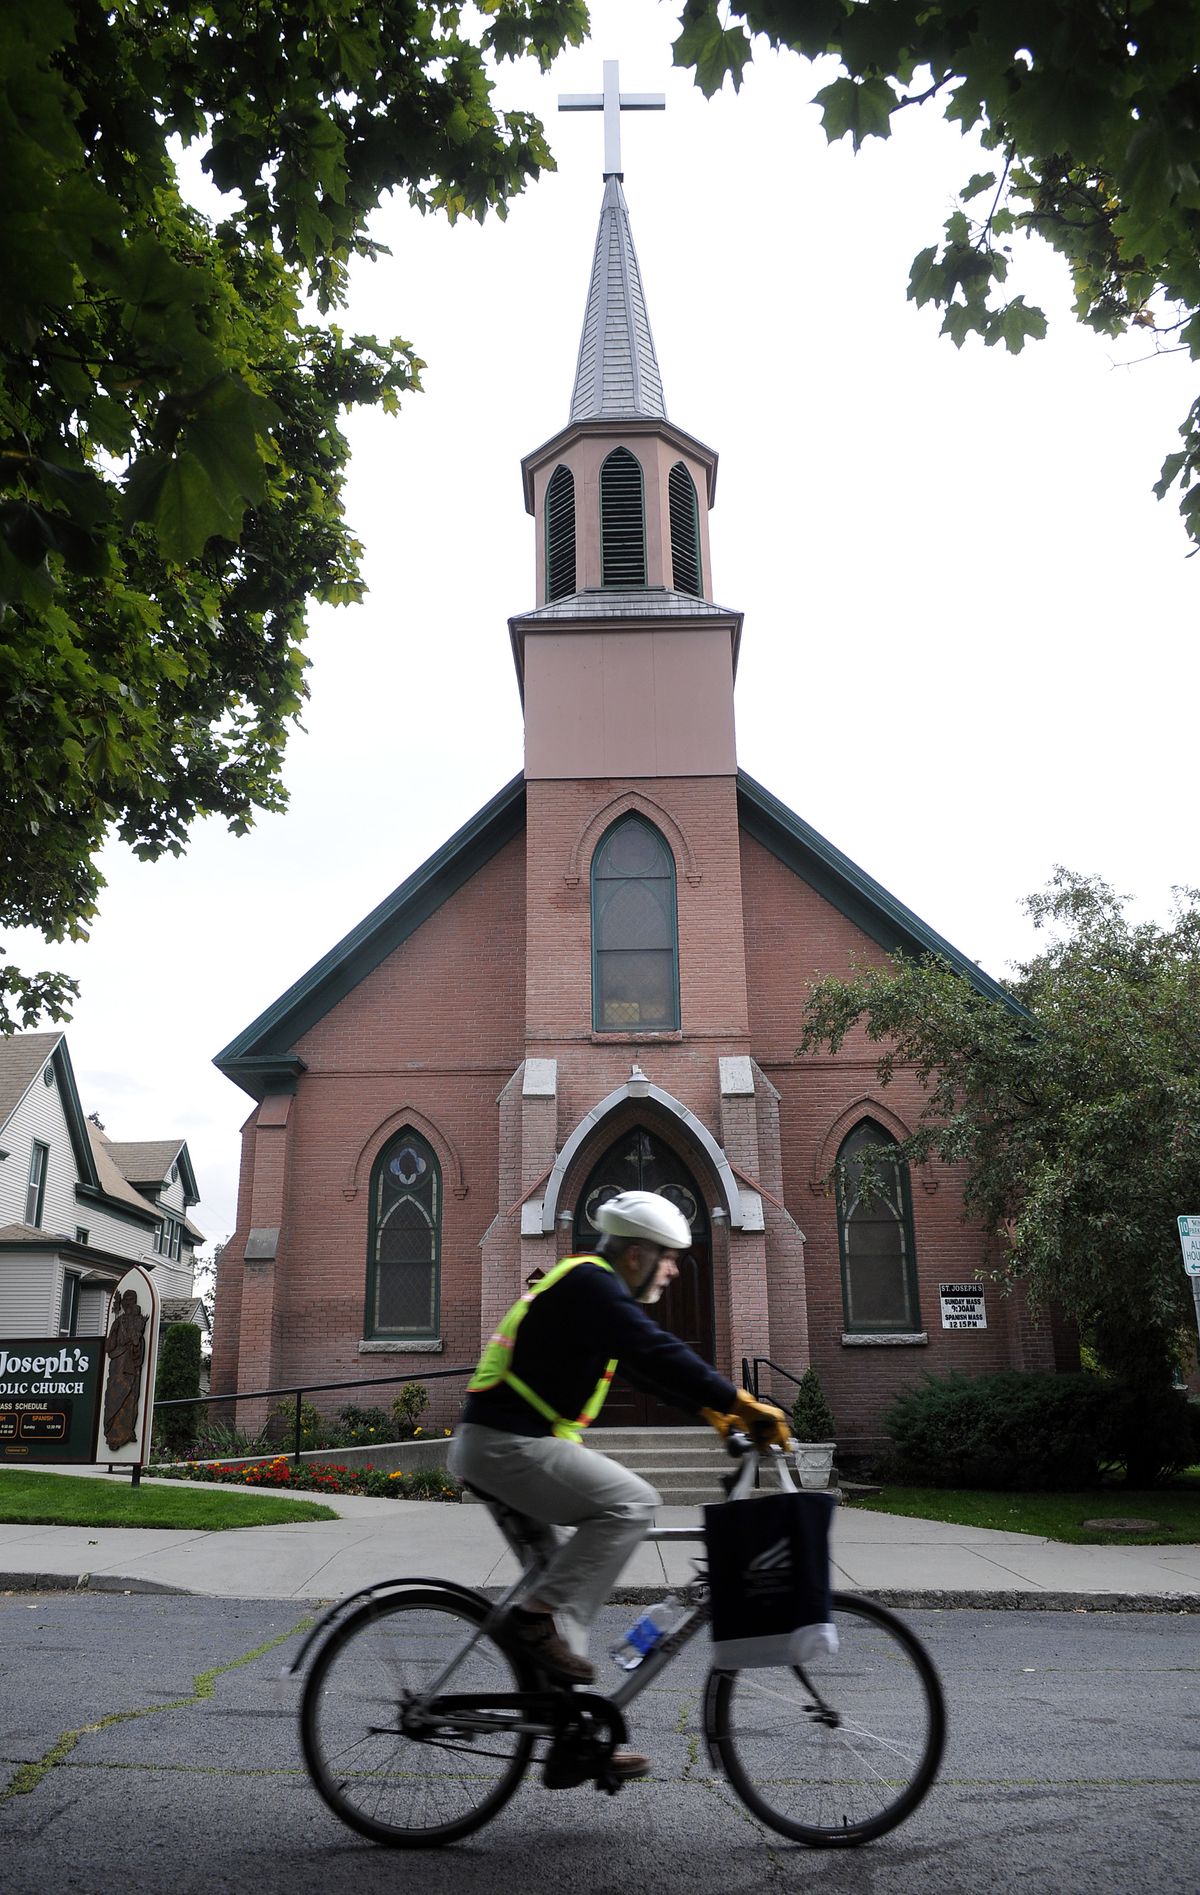 St Joseph’s Catholic Church will be the site for four performances each day on Tuesday and Wednesday (Dan Pelle / The Spokesman-Review)